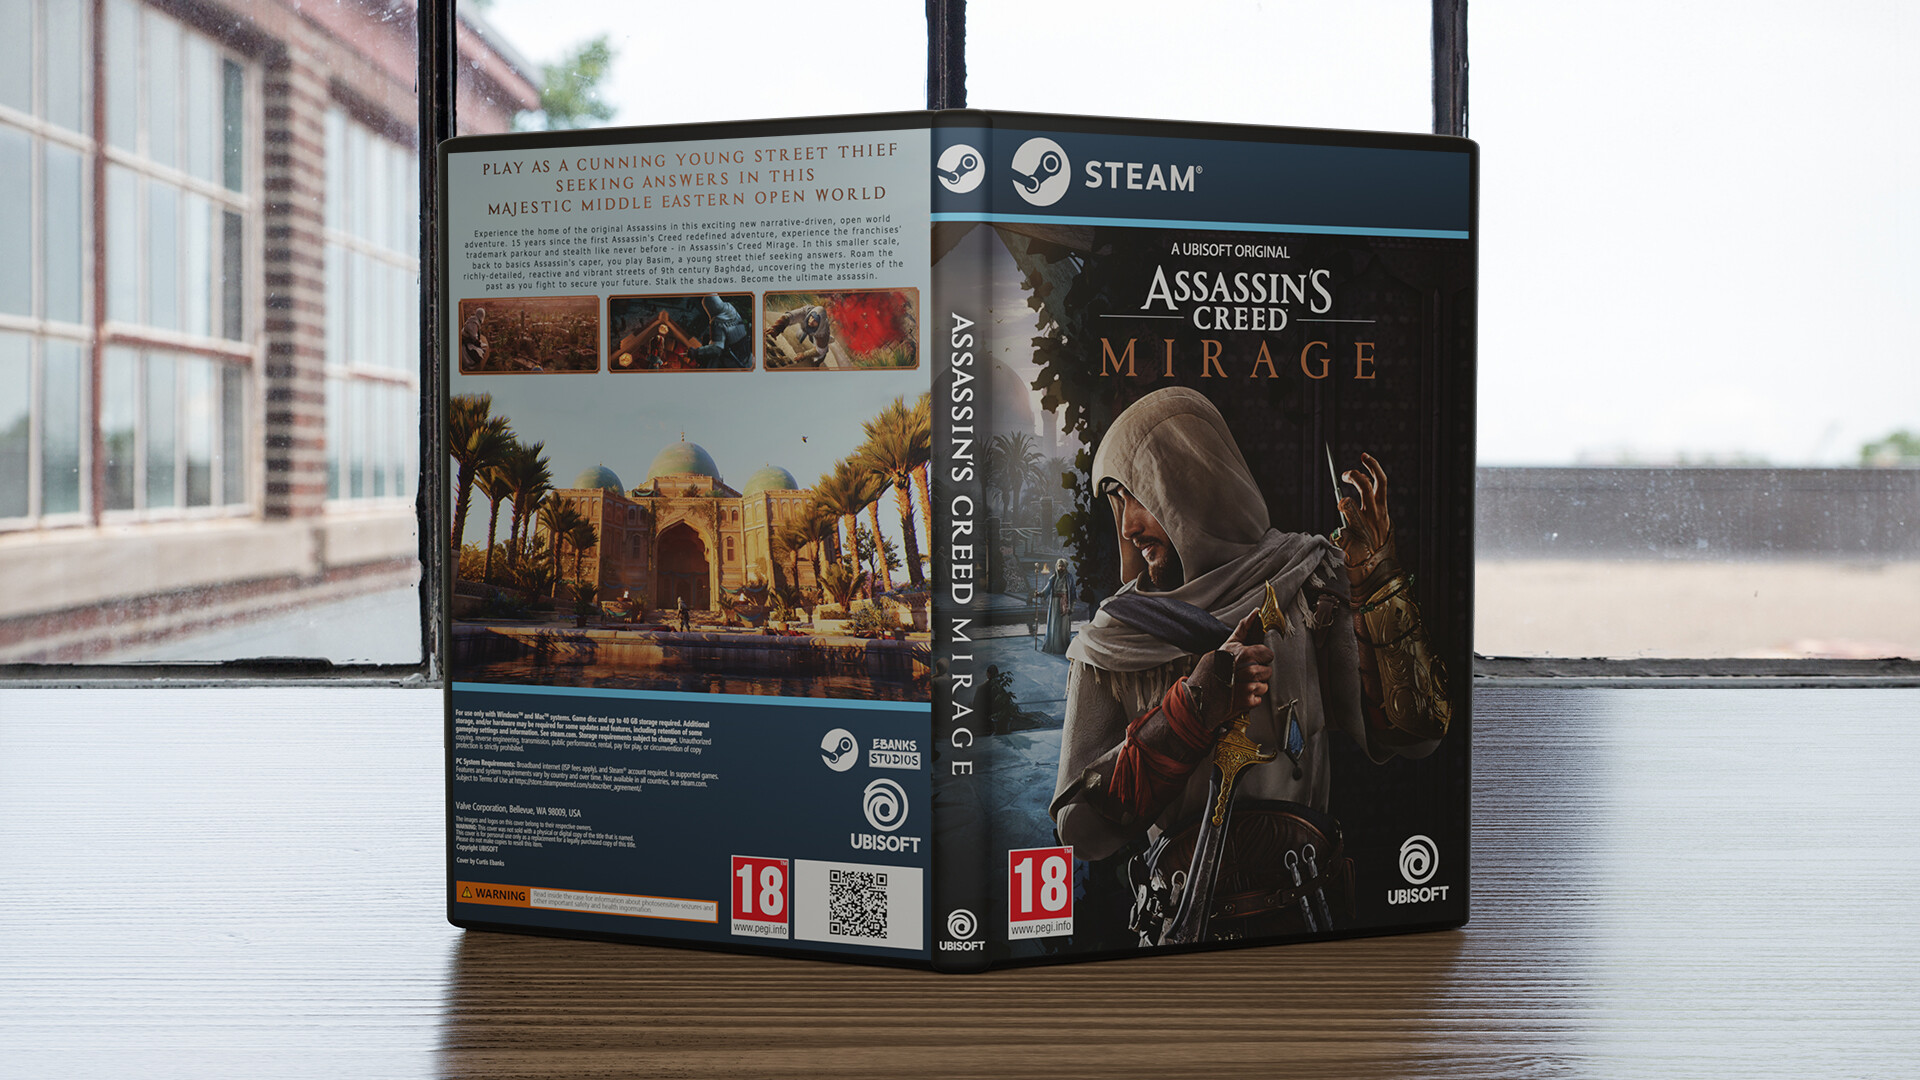 AC Mirage on PC, Is it ever coming to Steam?